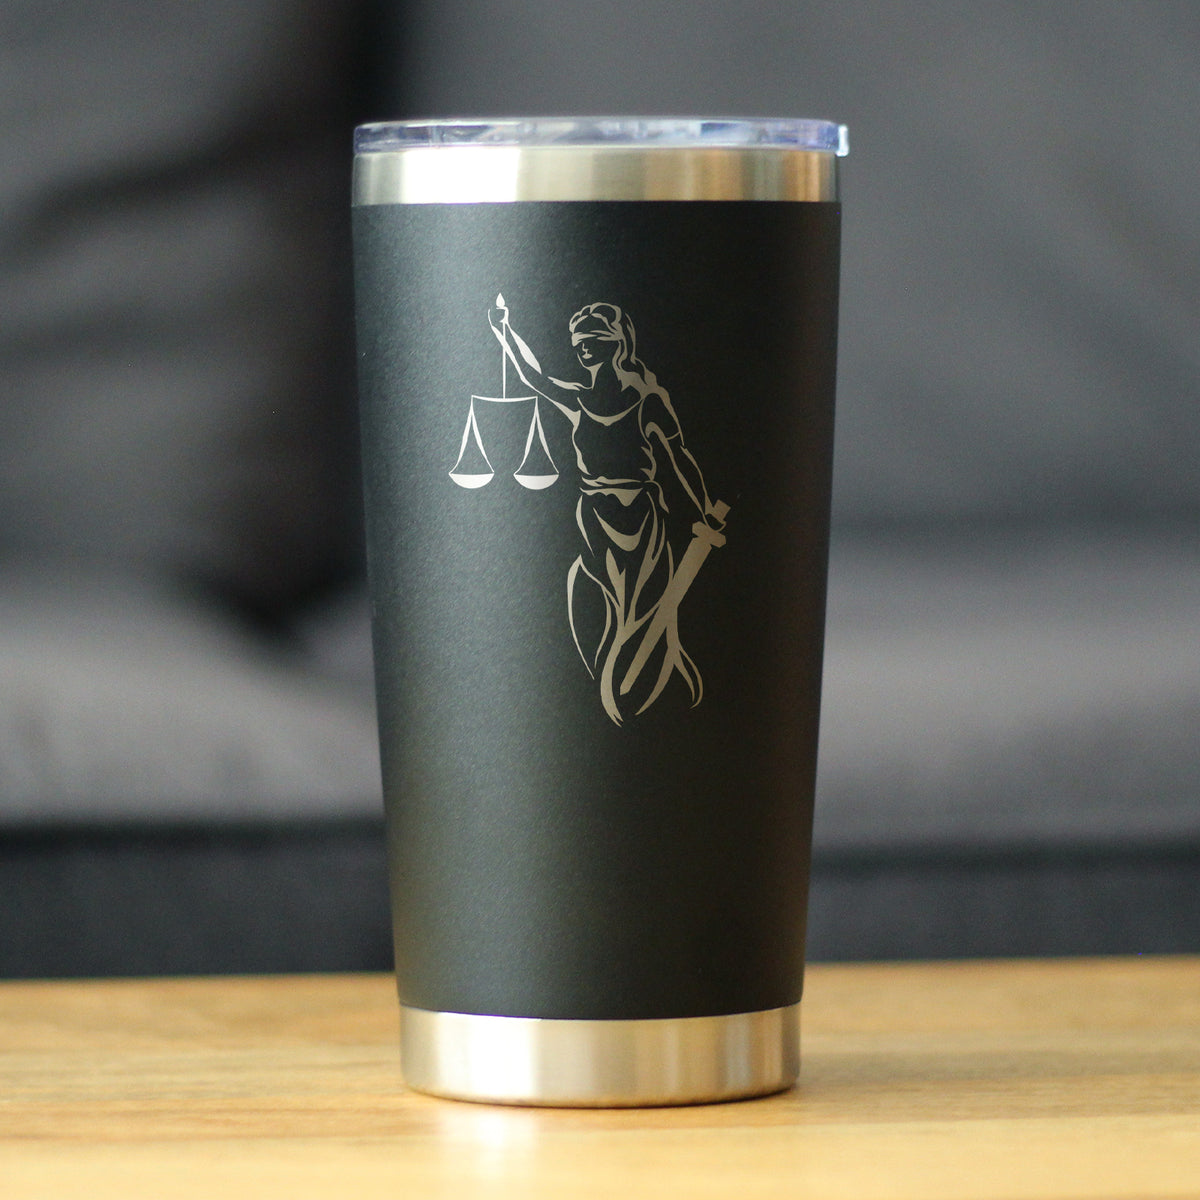 Lady Justice - Insulated Coffee Tumbler Cup with Sliding Lid - Stainless Steel Travel Mug - Unique Lawyer Gifts for Women and Men